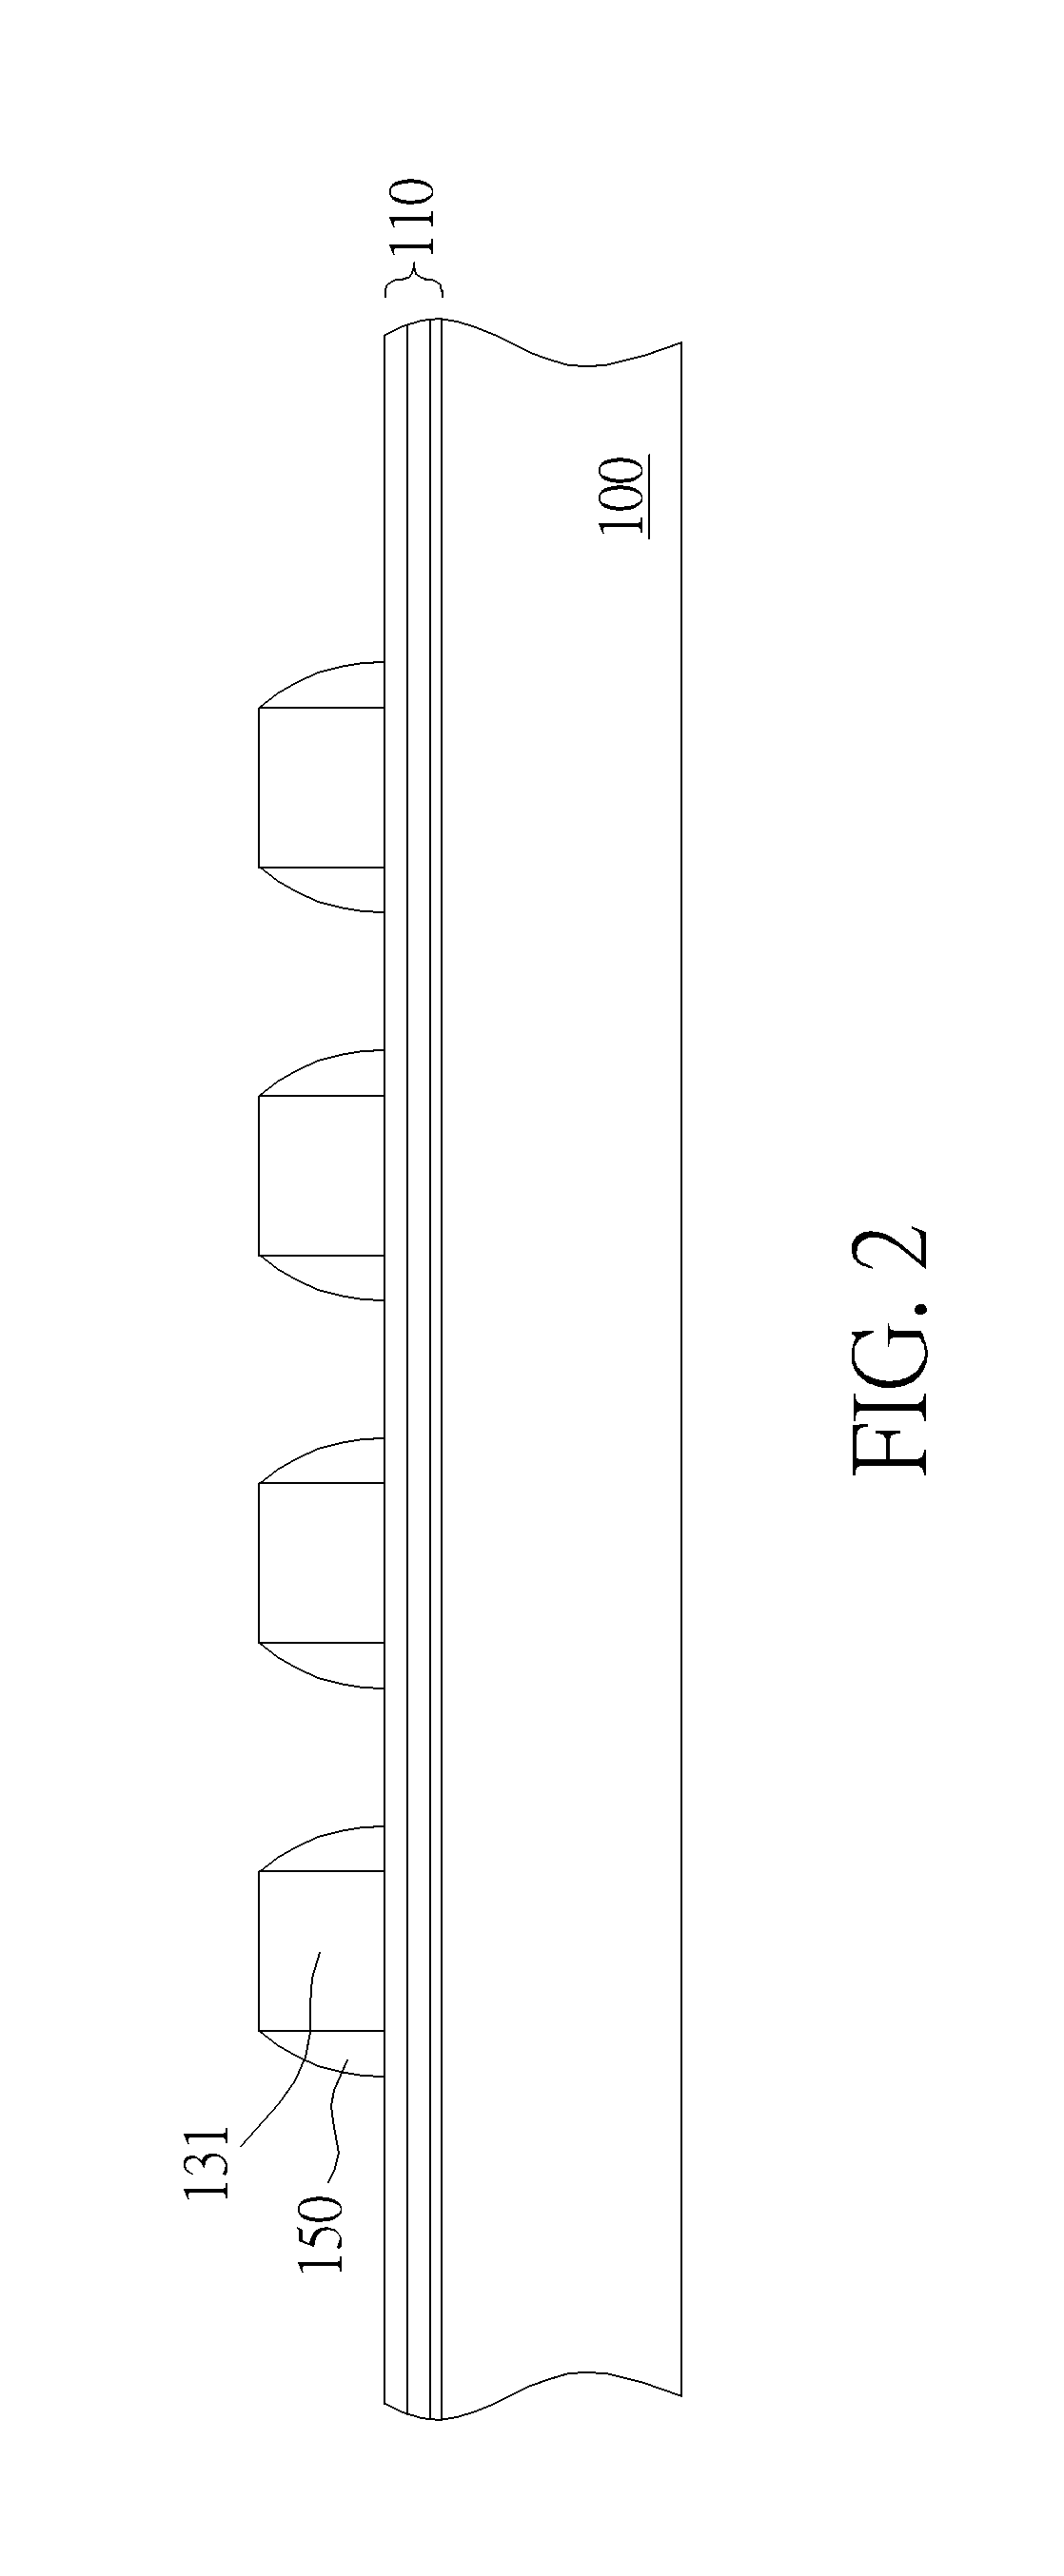 Method of forming a semiconductor structure